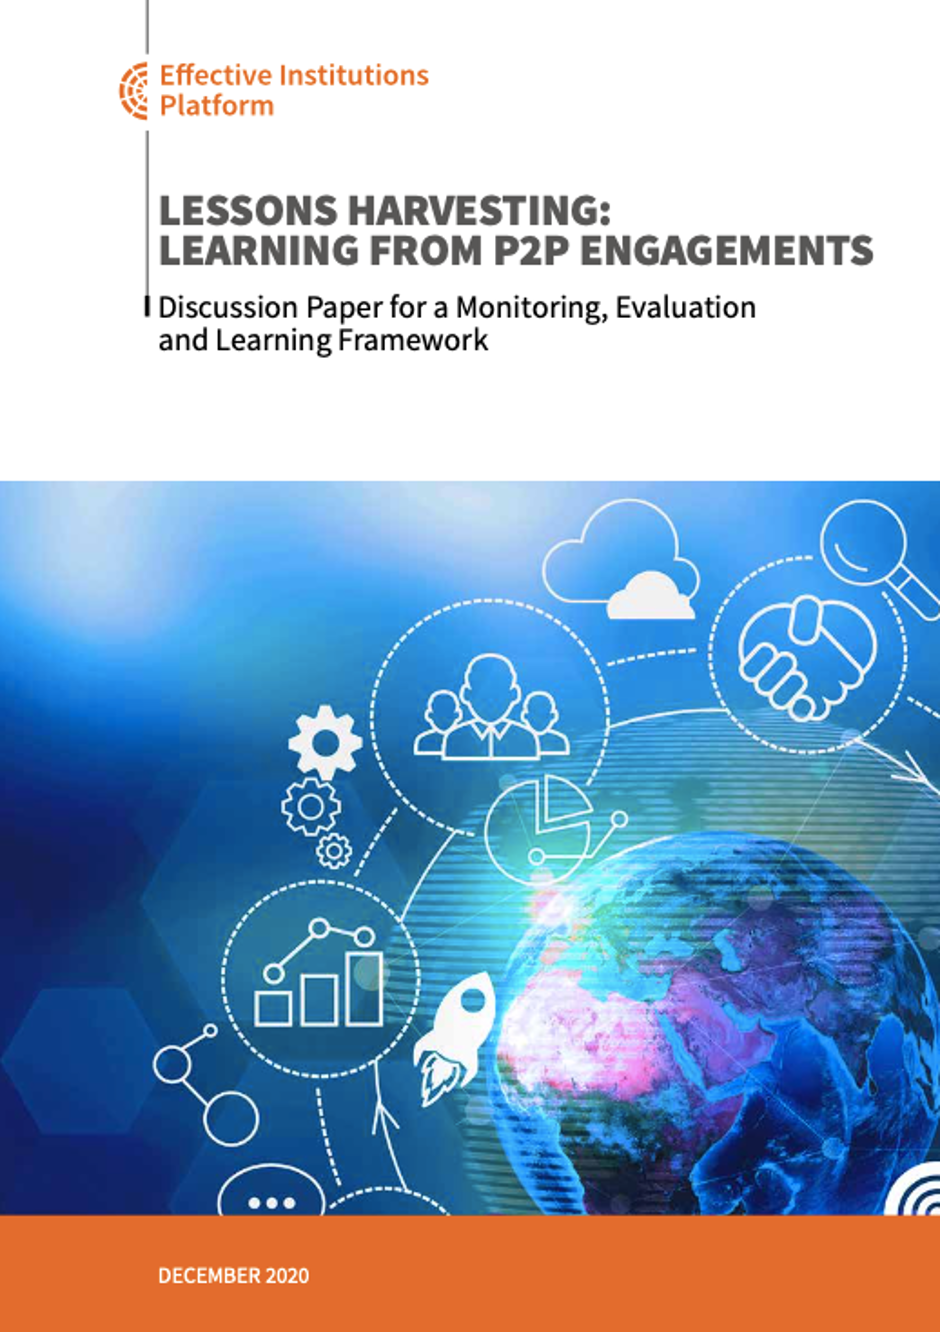 The Report “Lessons Harvesting: Learning from P2P Engagements”